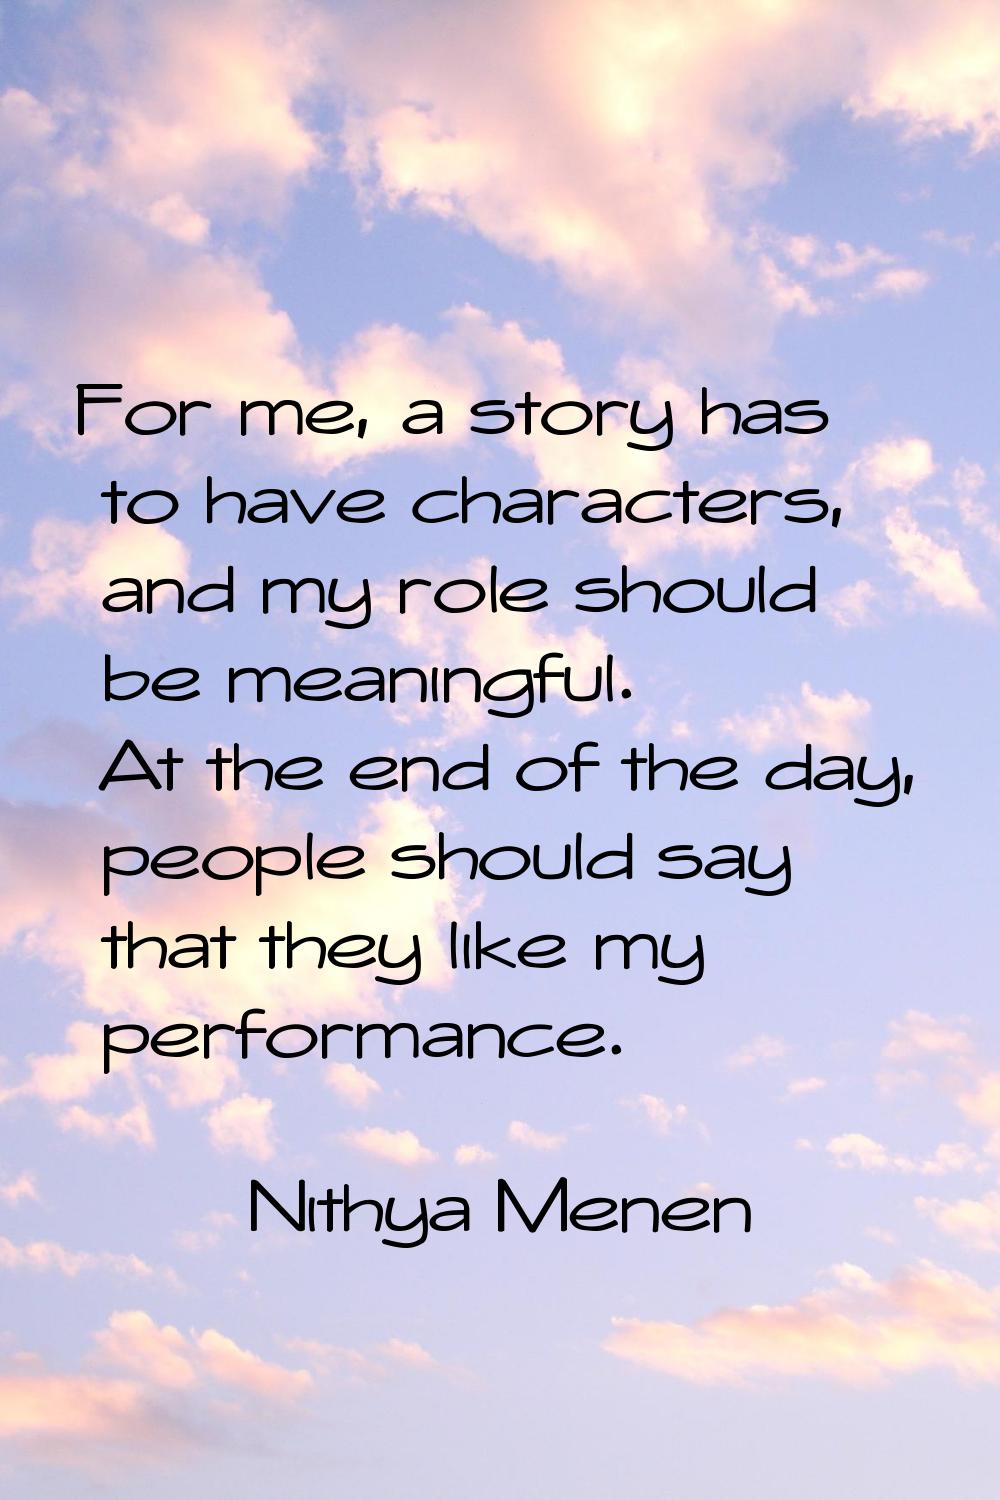 For me, a story has to have characters, and my role should be meaningful. At the end of the day, pe